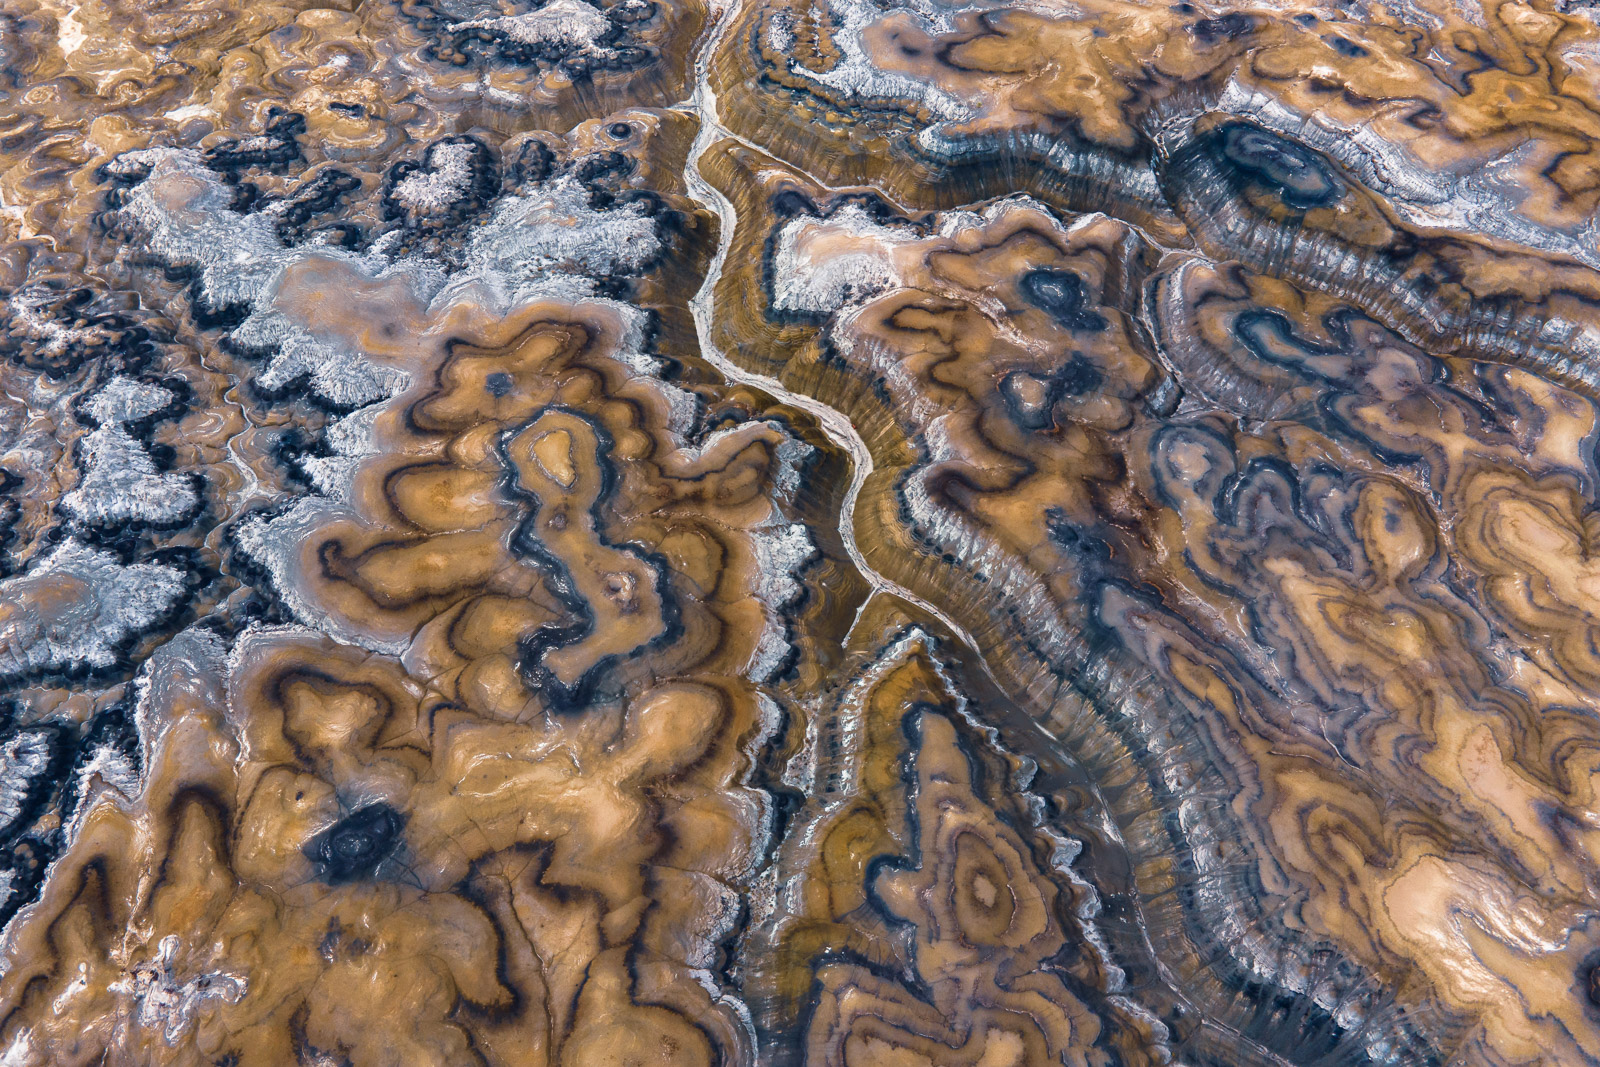 Ariel abstraction of the Bisti Badlands Wilderness, New Mexico